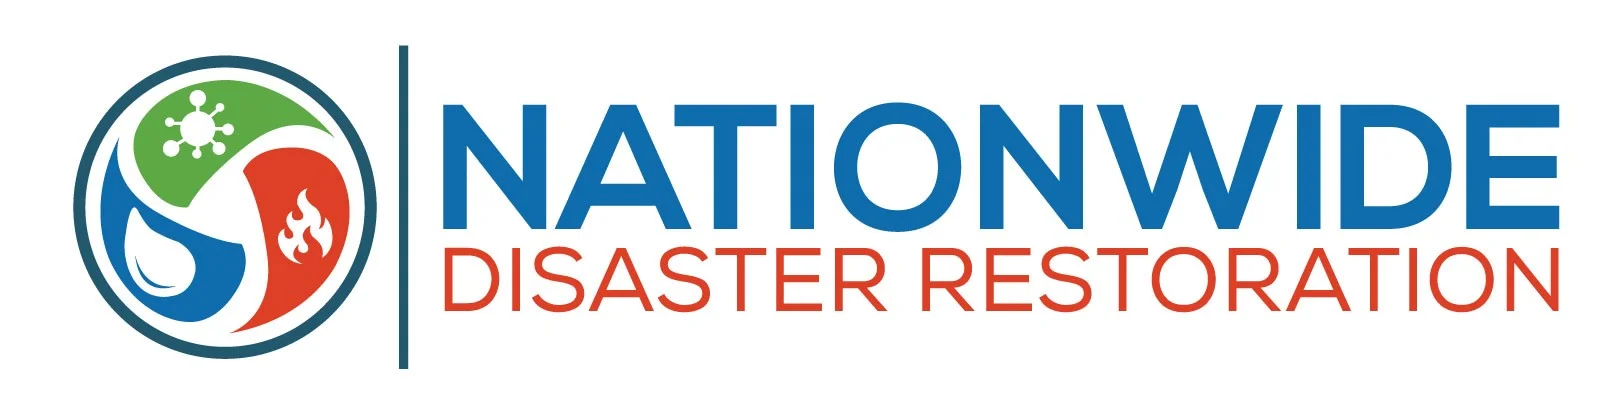 disaster restoration services in New Jersey